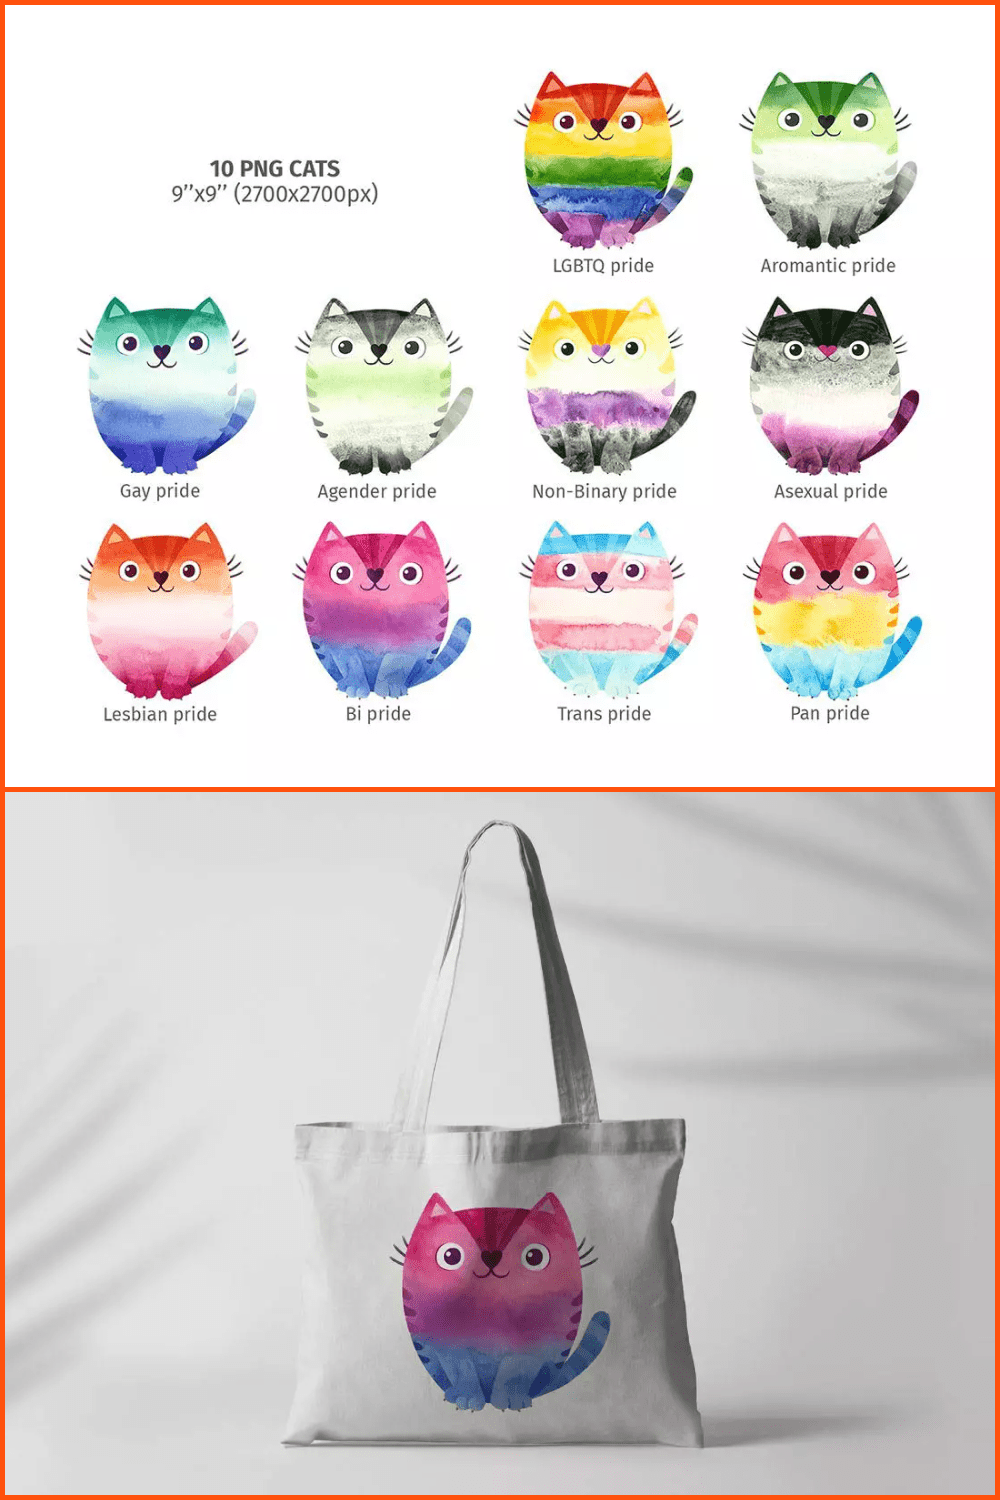 10 cute colorful cats.